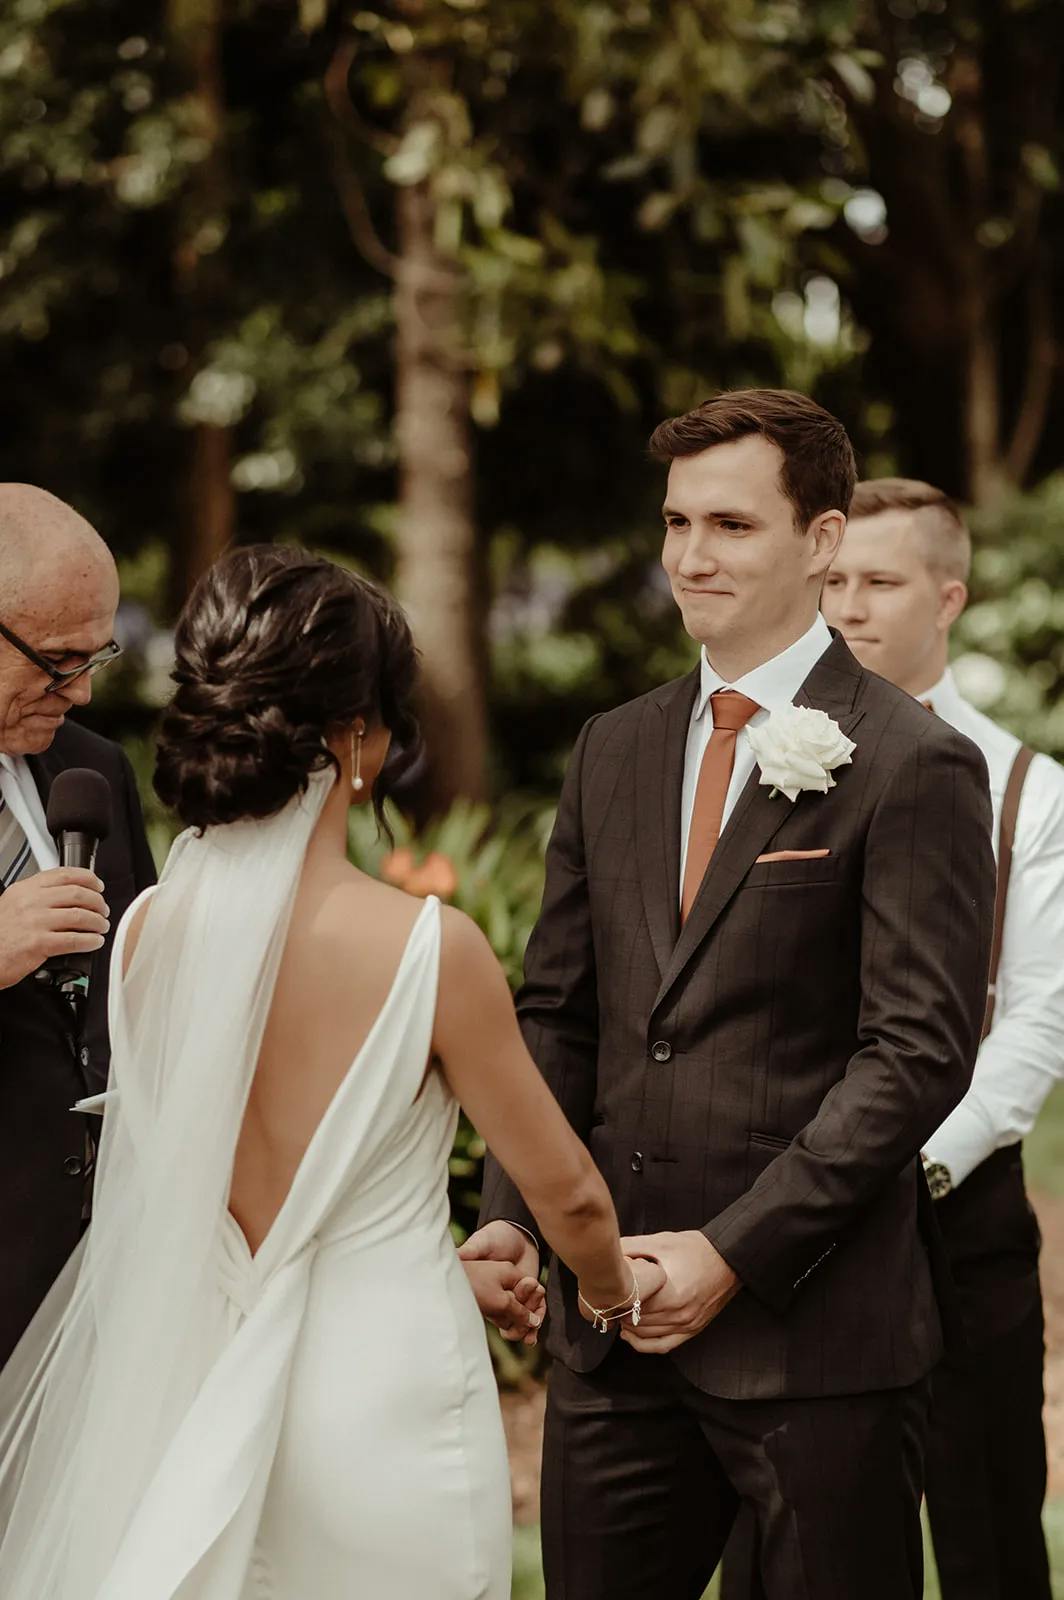 A bride and groom stand facing each other, holding hands, during their outdoor wedding ceremony. The groom wears a dark suit with a white flower boutonniere, while the bride wears a white dress with a deep back and a long veil. A person officiates the ceremony.